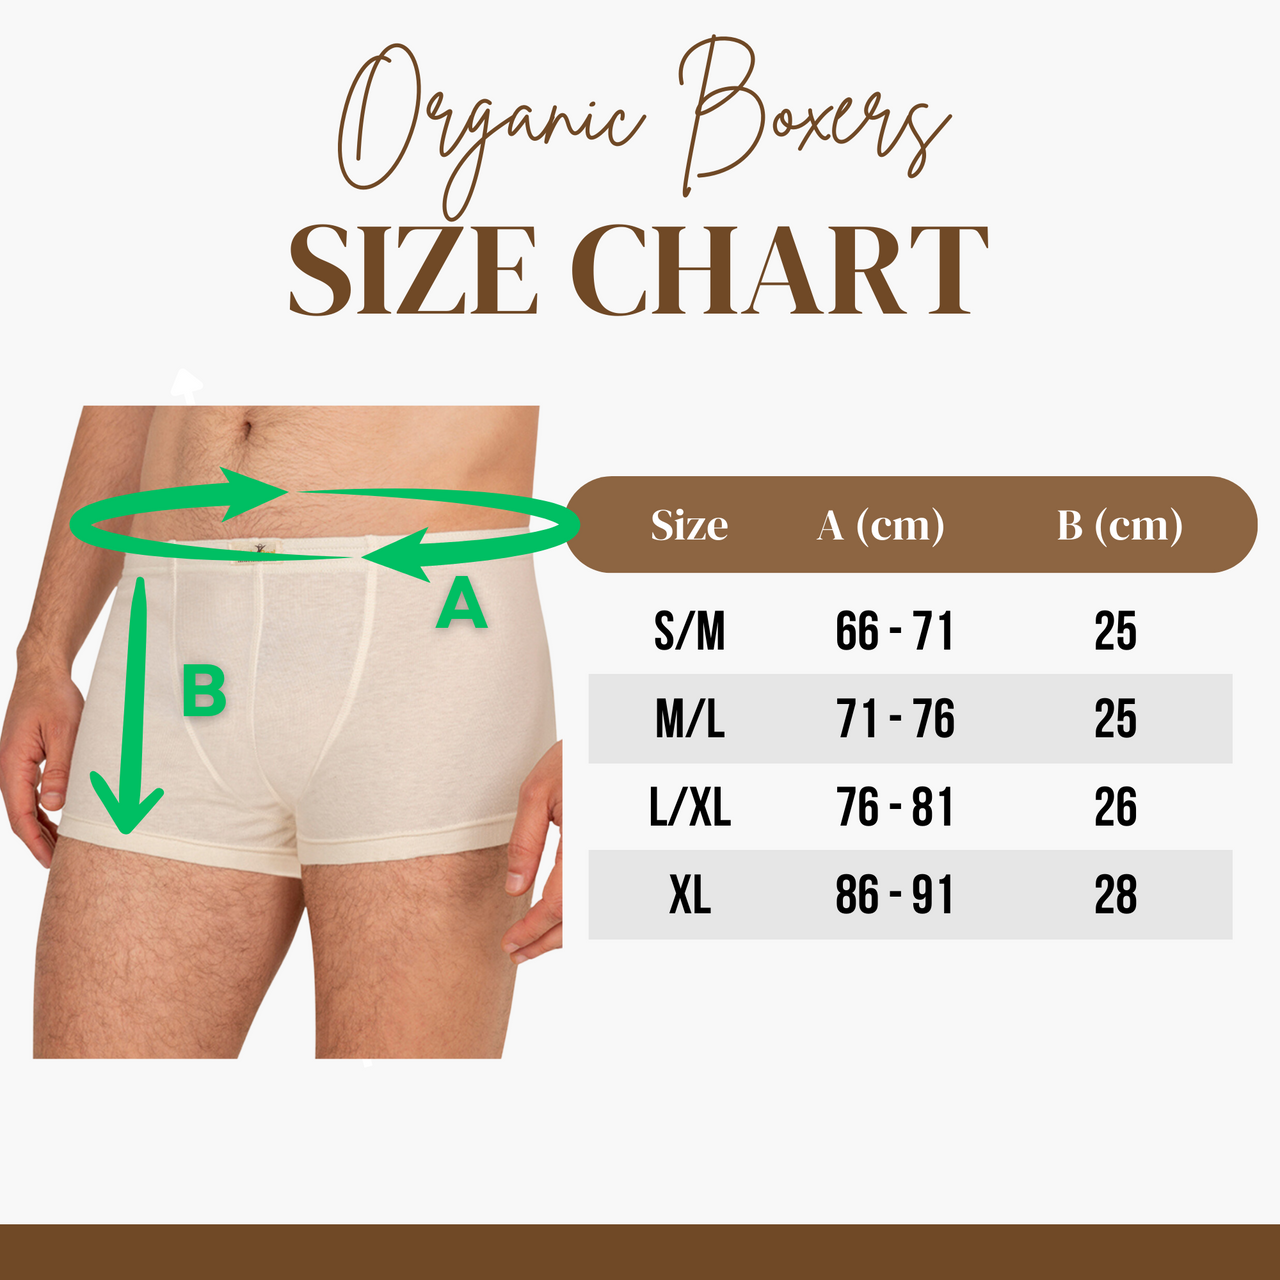 Hesta Organic Cotton Underwear Review (and how they compare to